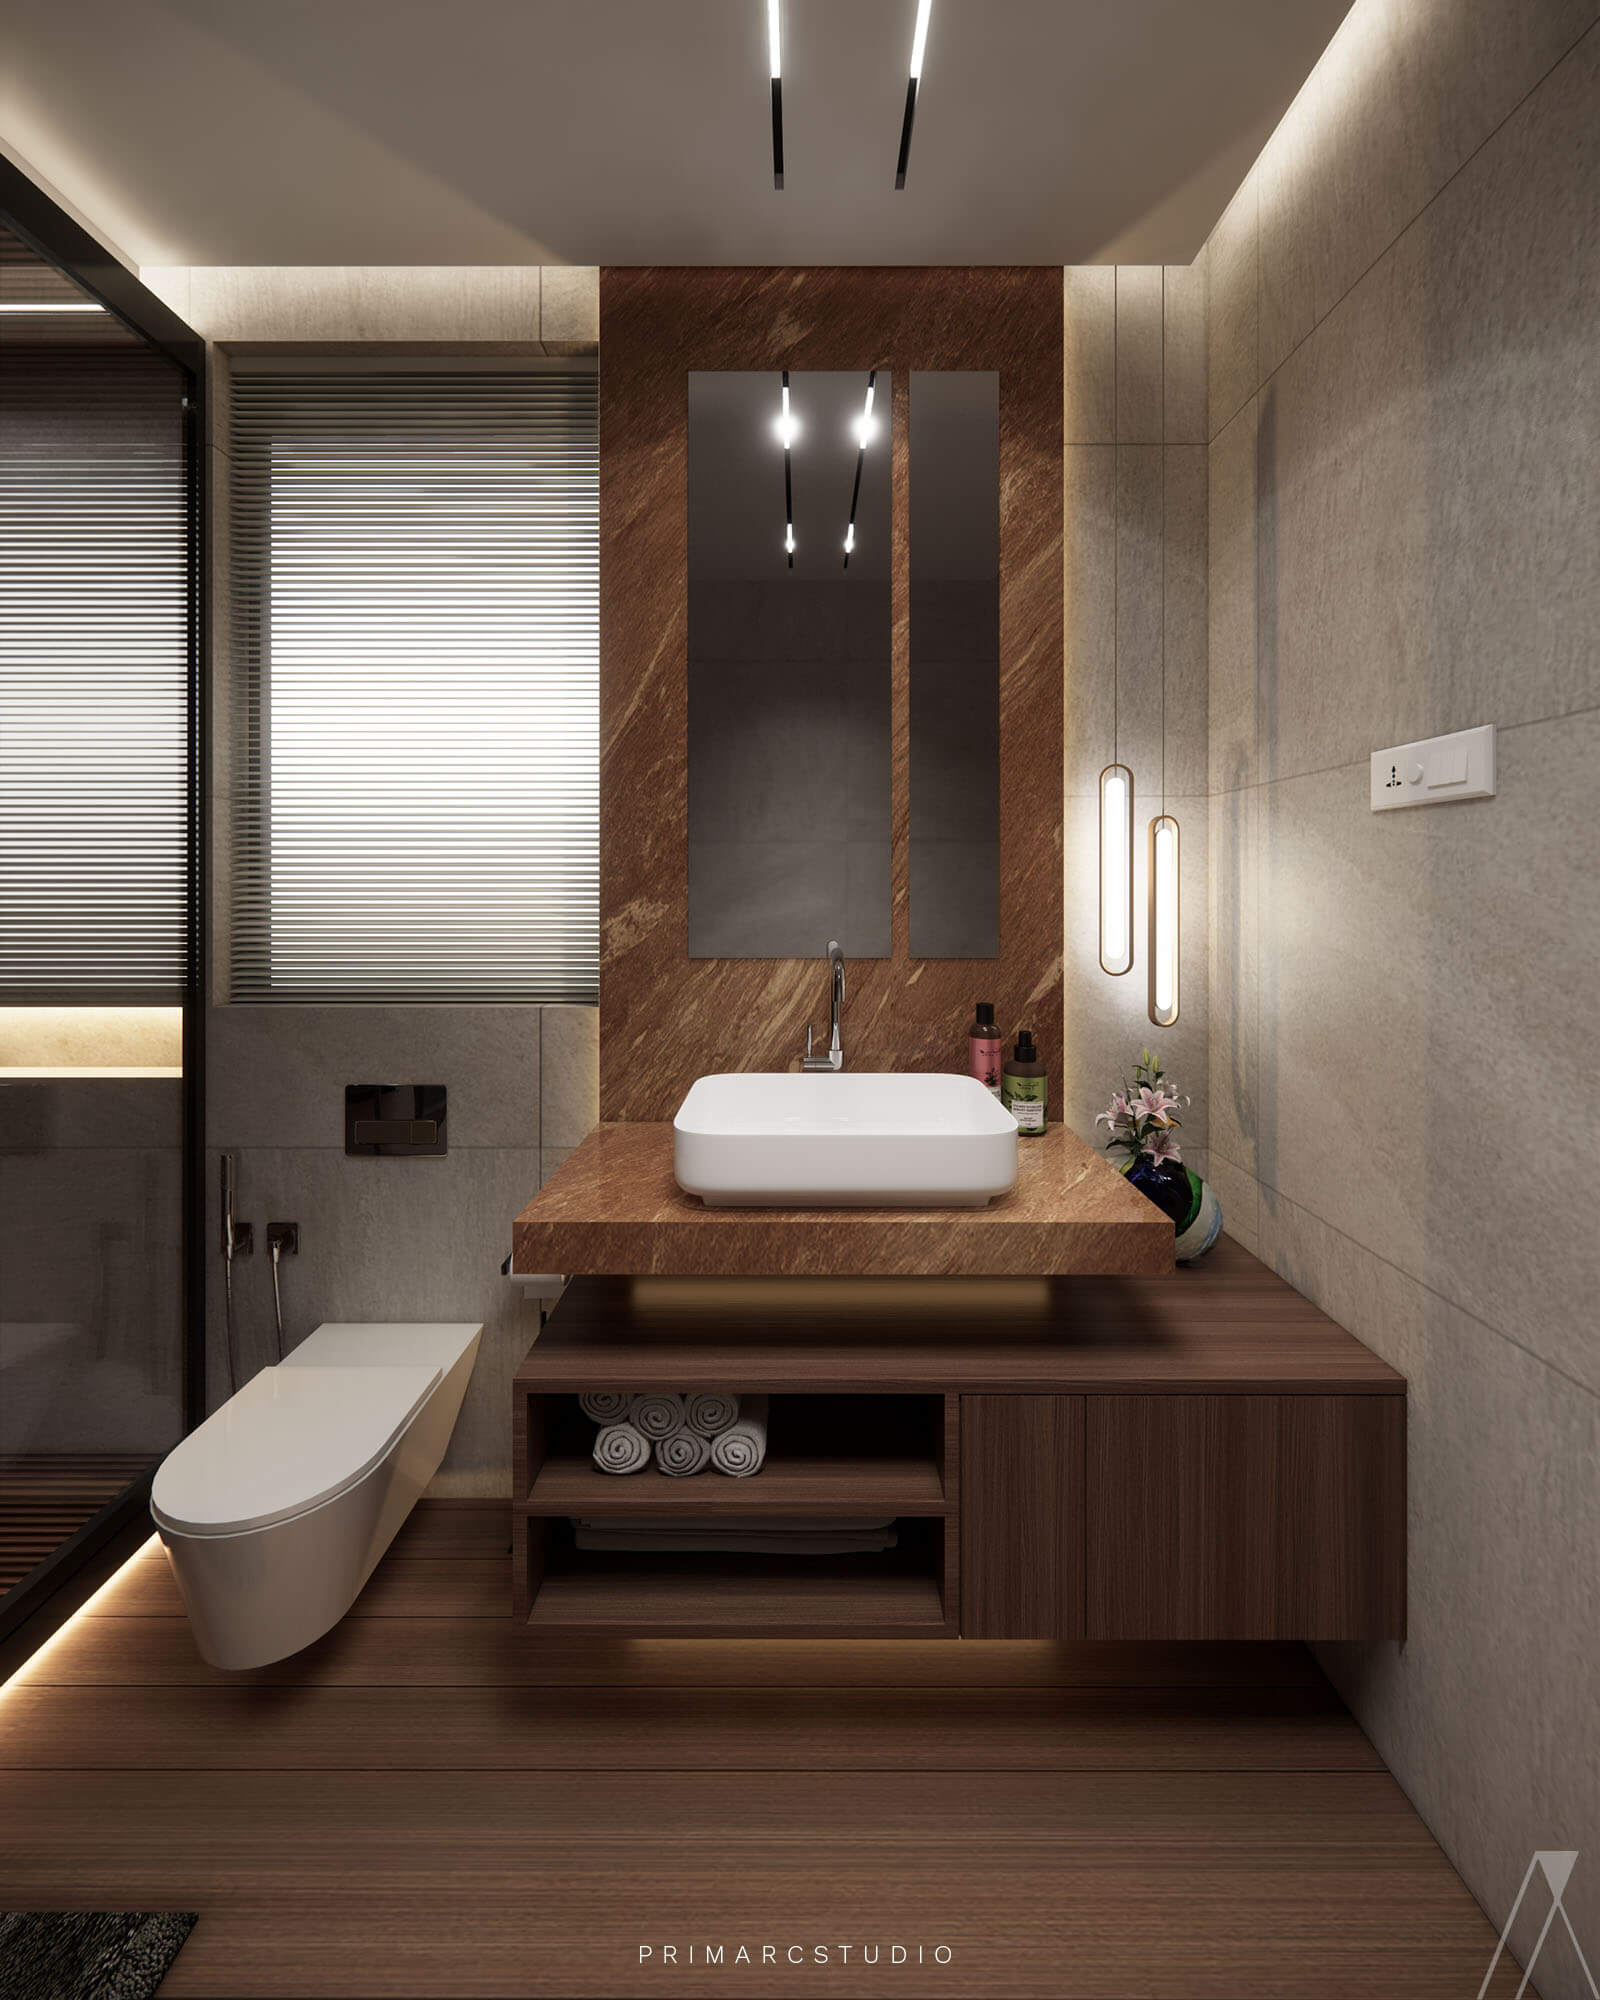 Washroom interior design in wooden and neutral colors